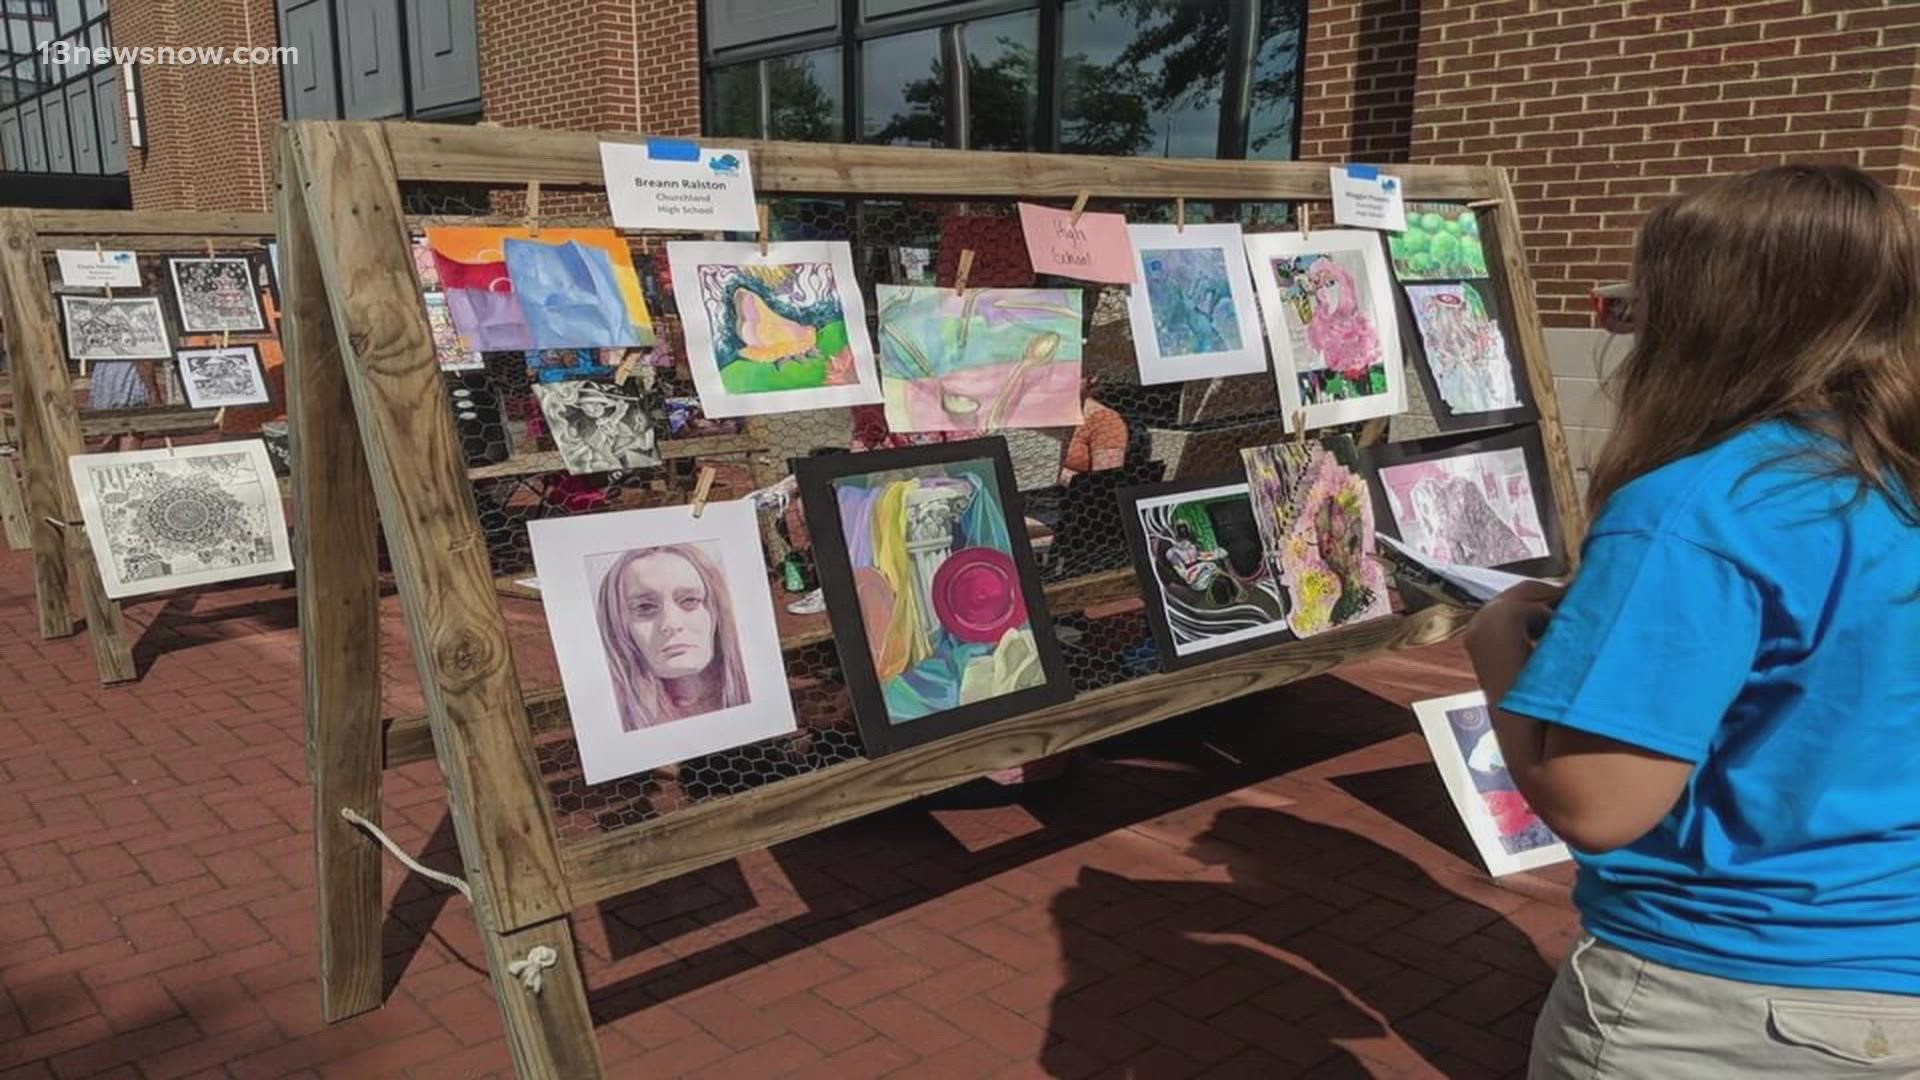 If you're an artist or even a fan of art, there's an art show happening this weekend in Portsmouth that you won't want to miss!